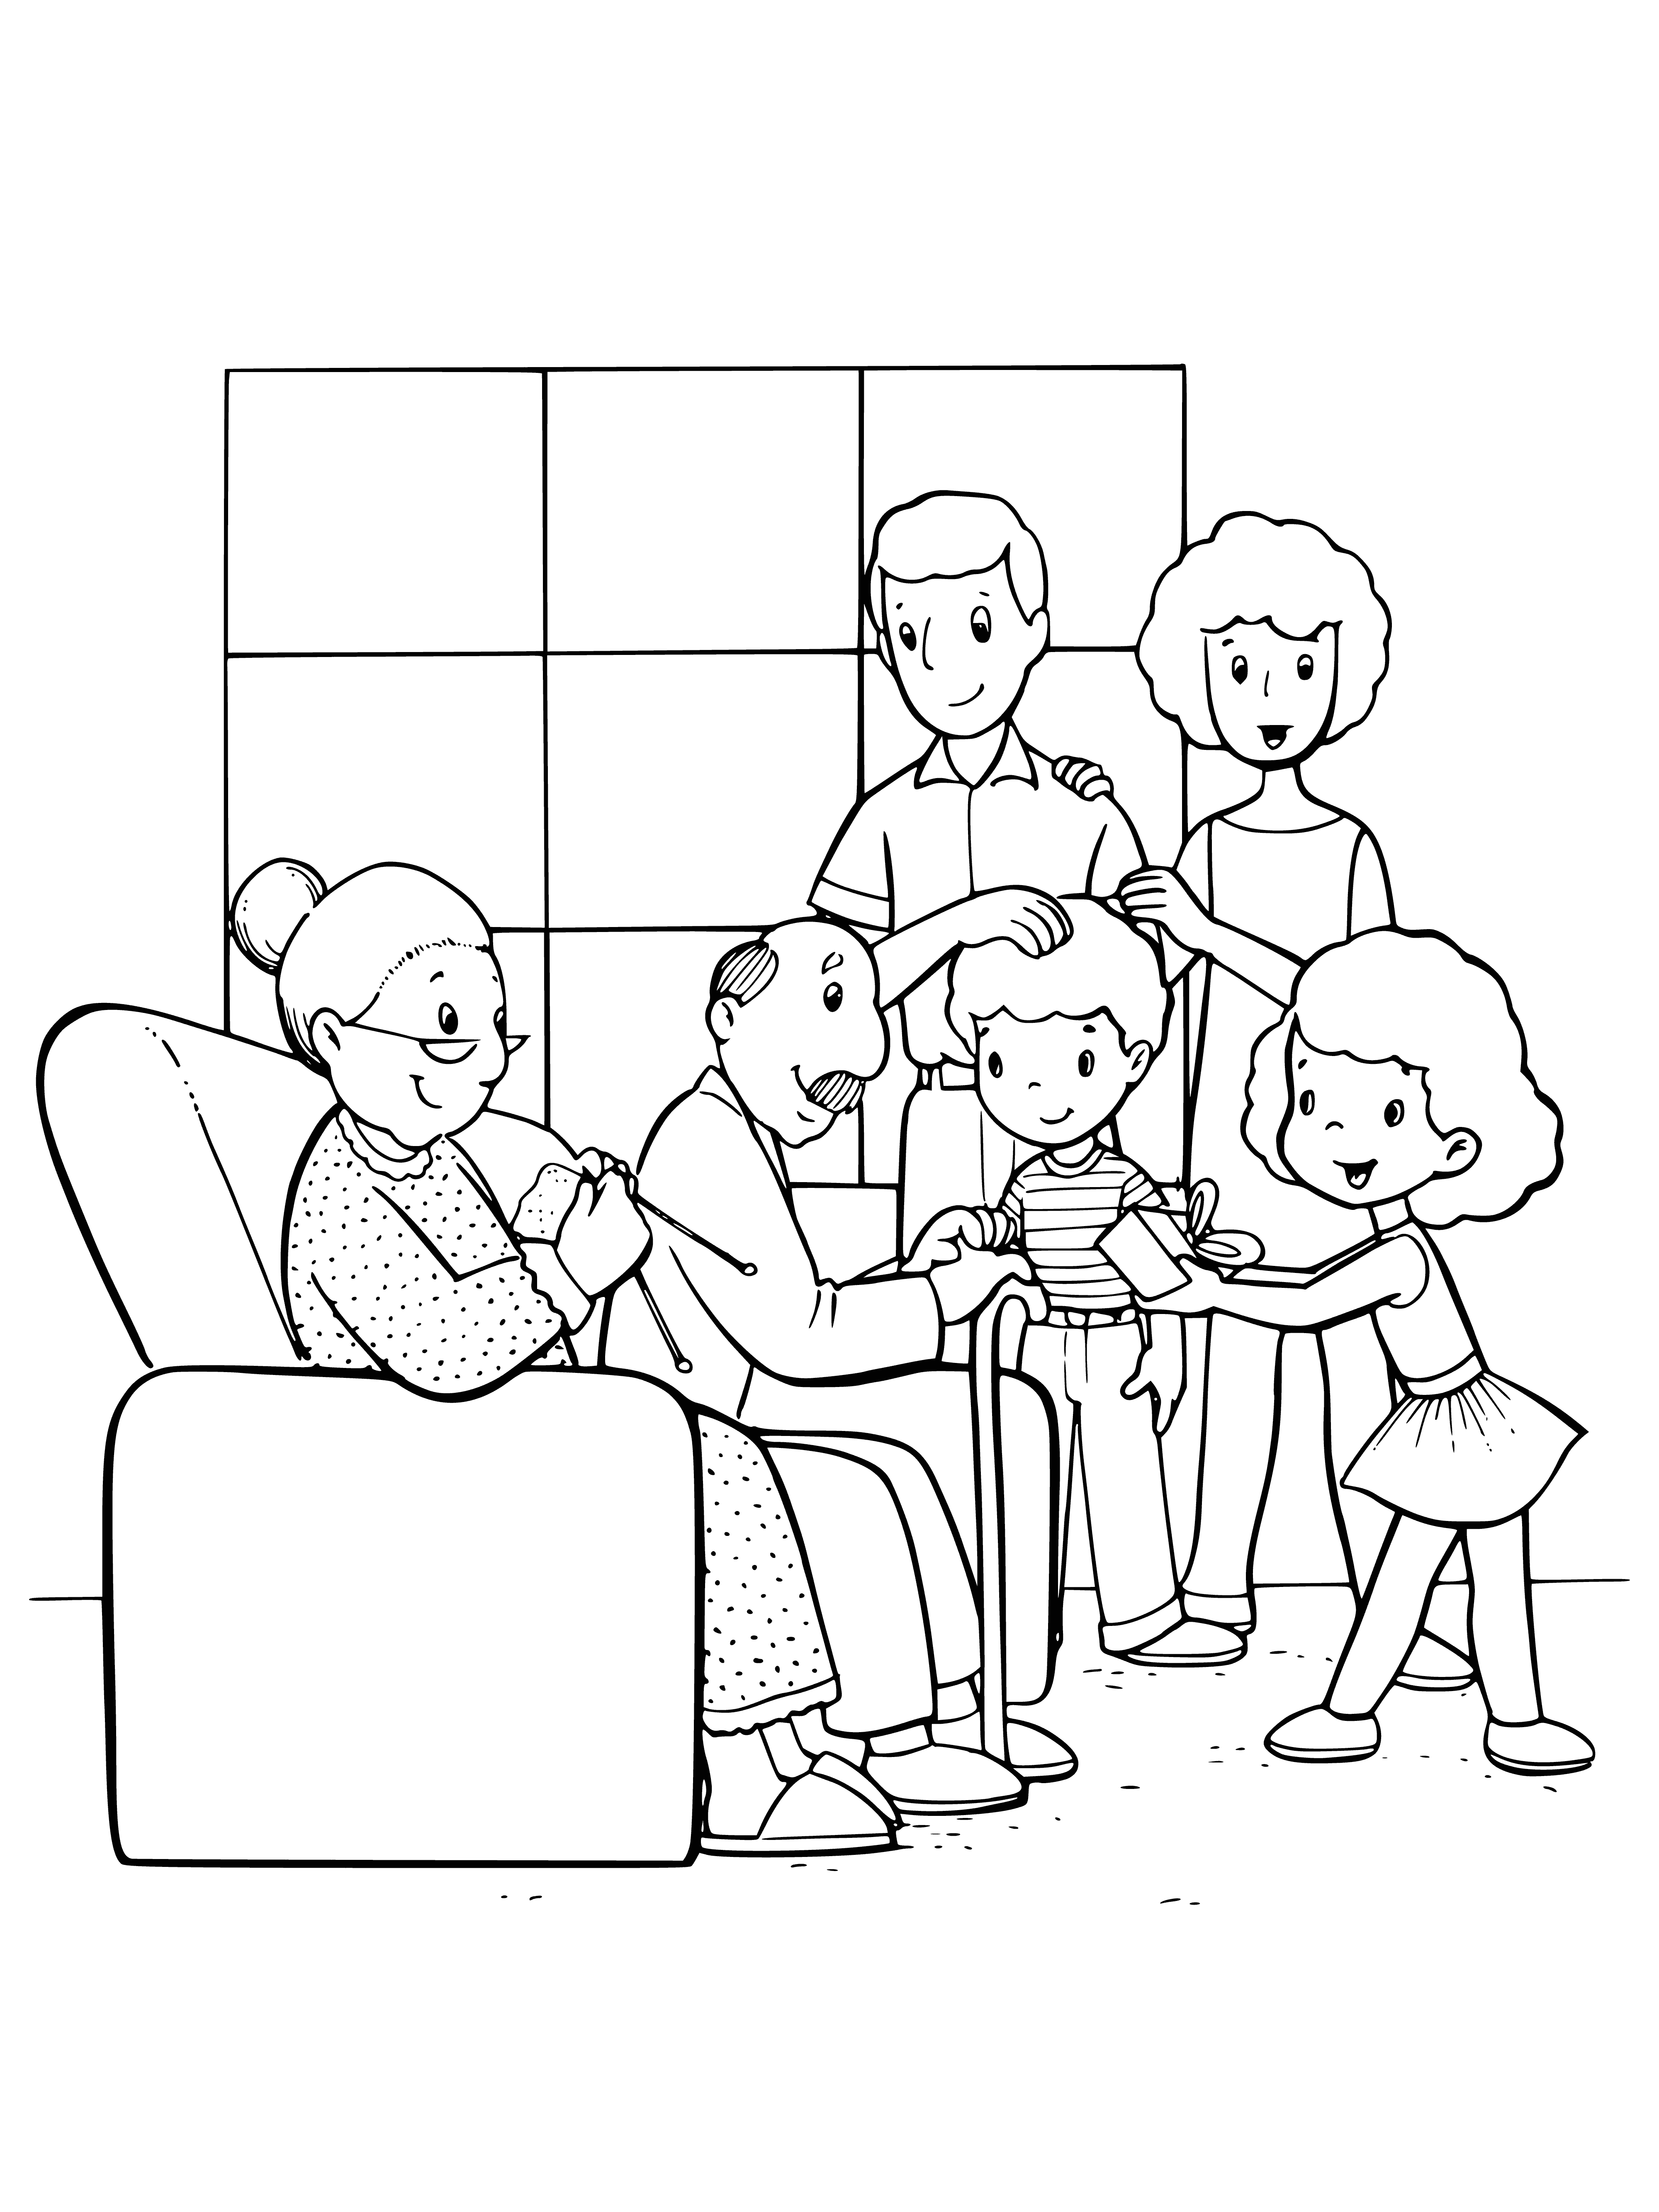 coloring page: Big family smiles, laughing and enjoying a picnic lunch together. Delicious spread on the table. Joyful reunion.